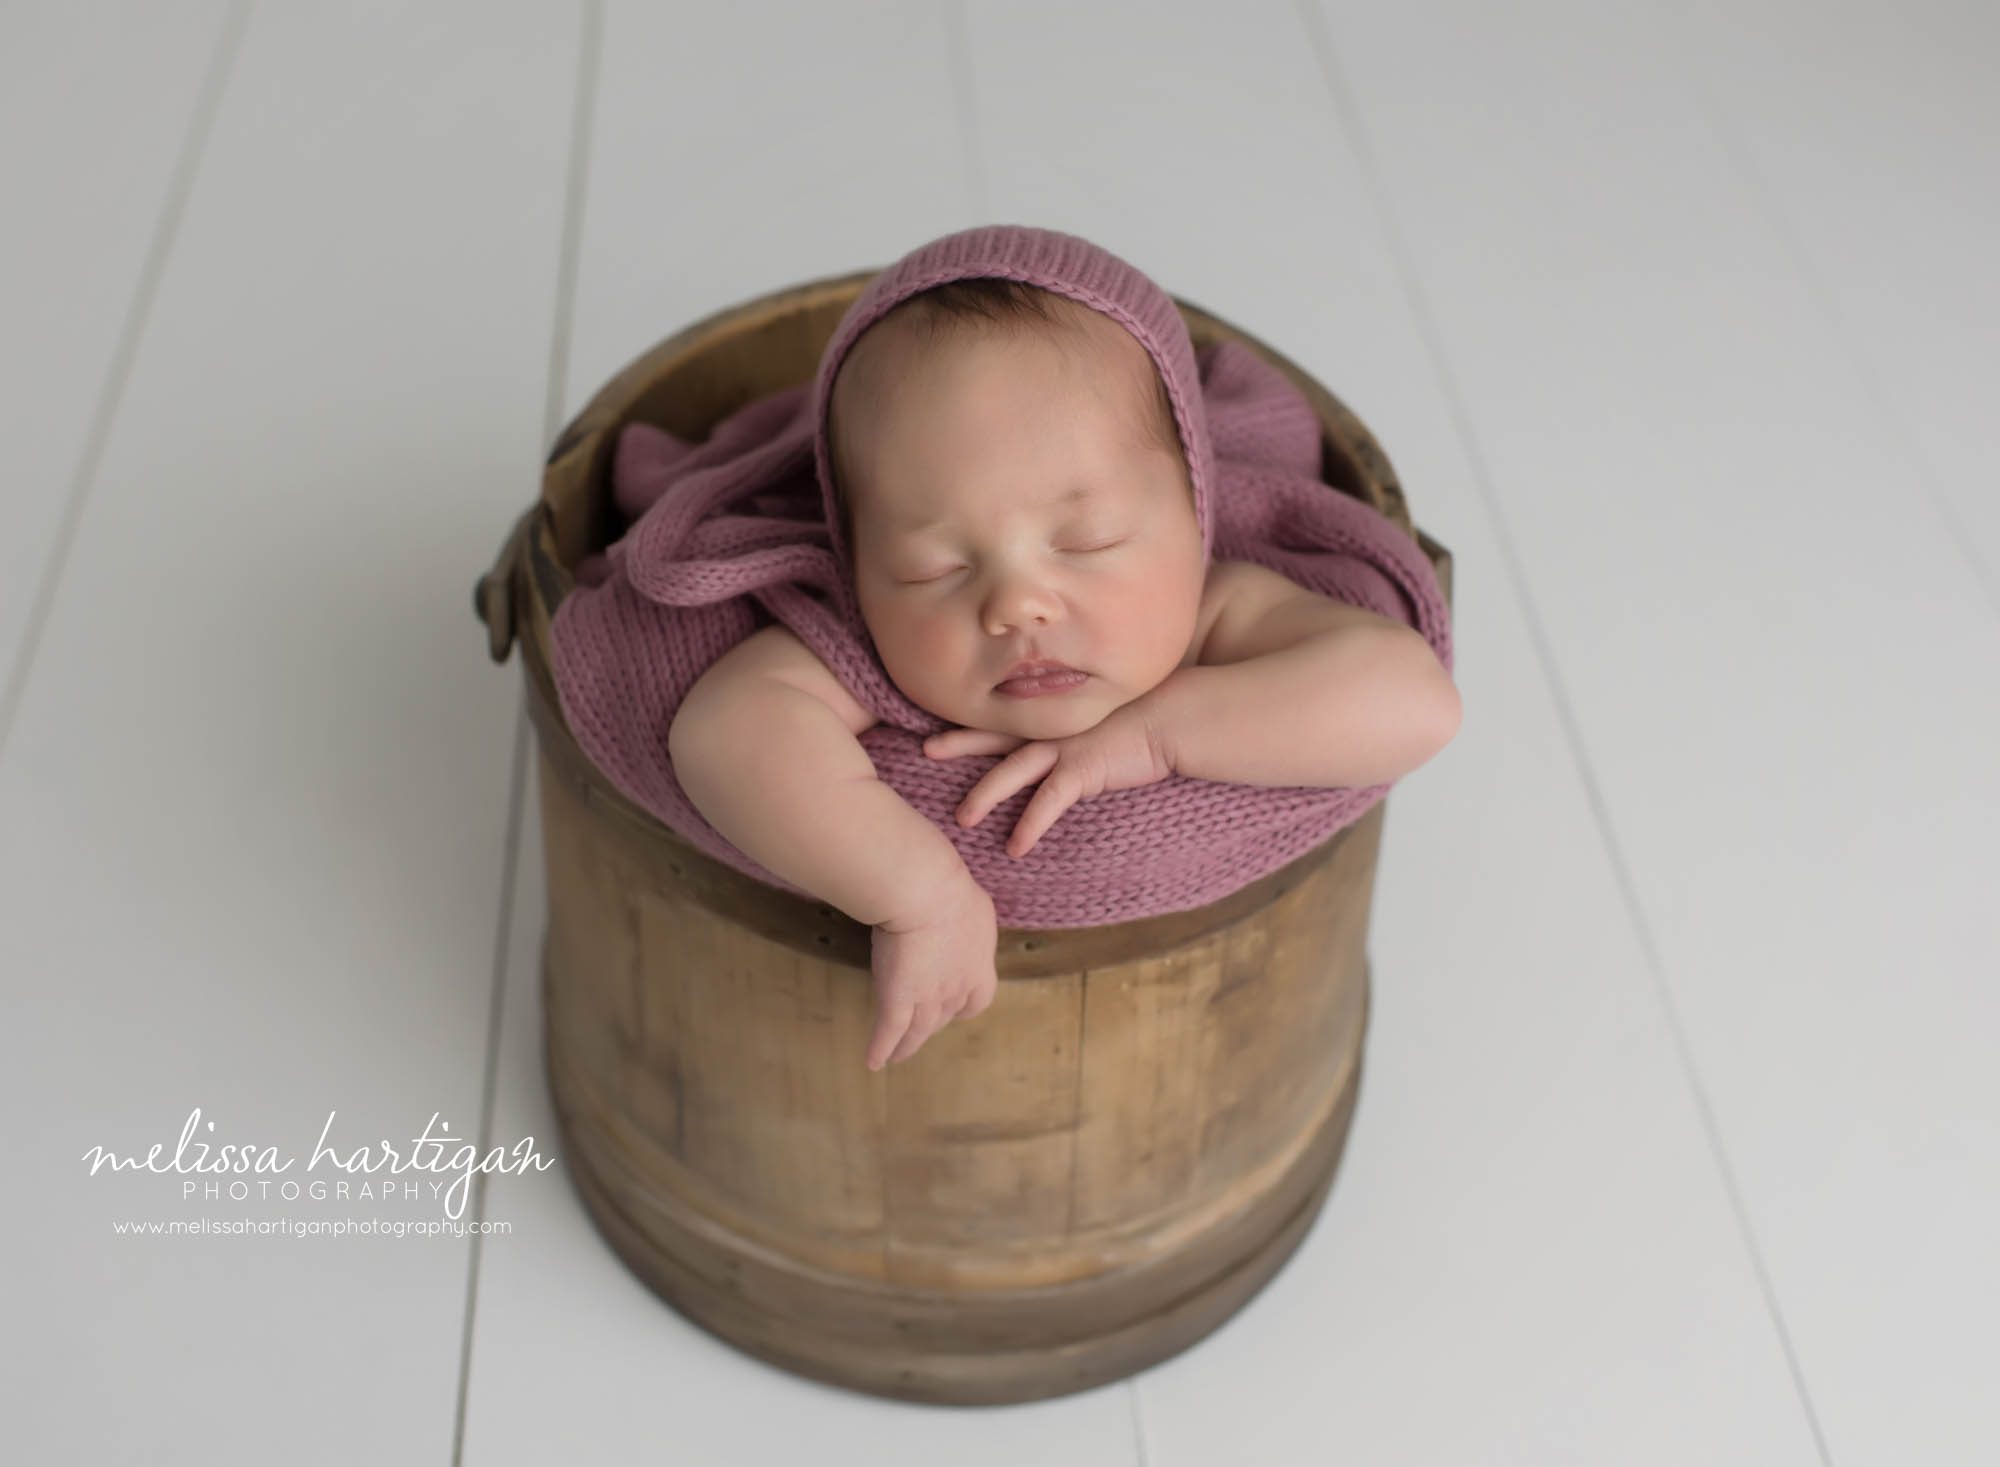 newborn baby girl posed in wooden bucket with pink bonnet and wrap